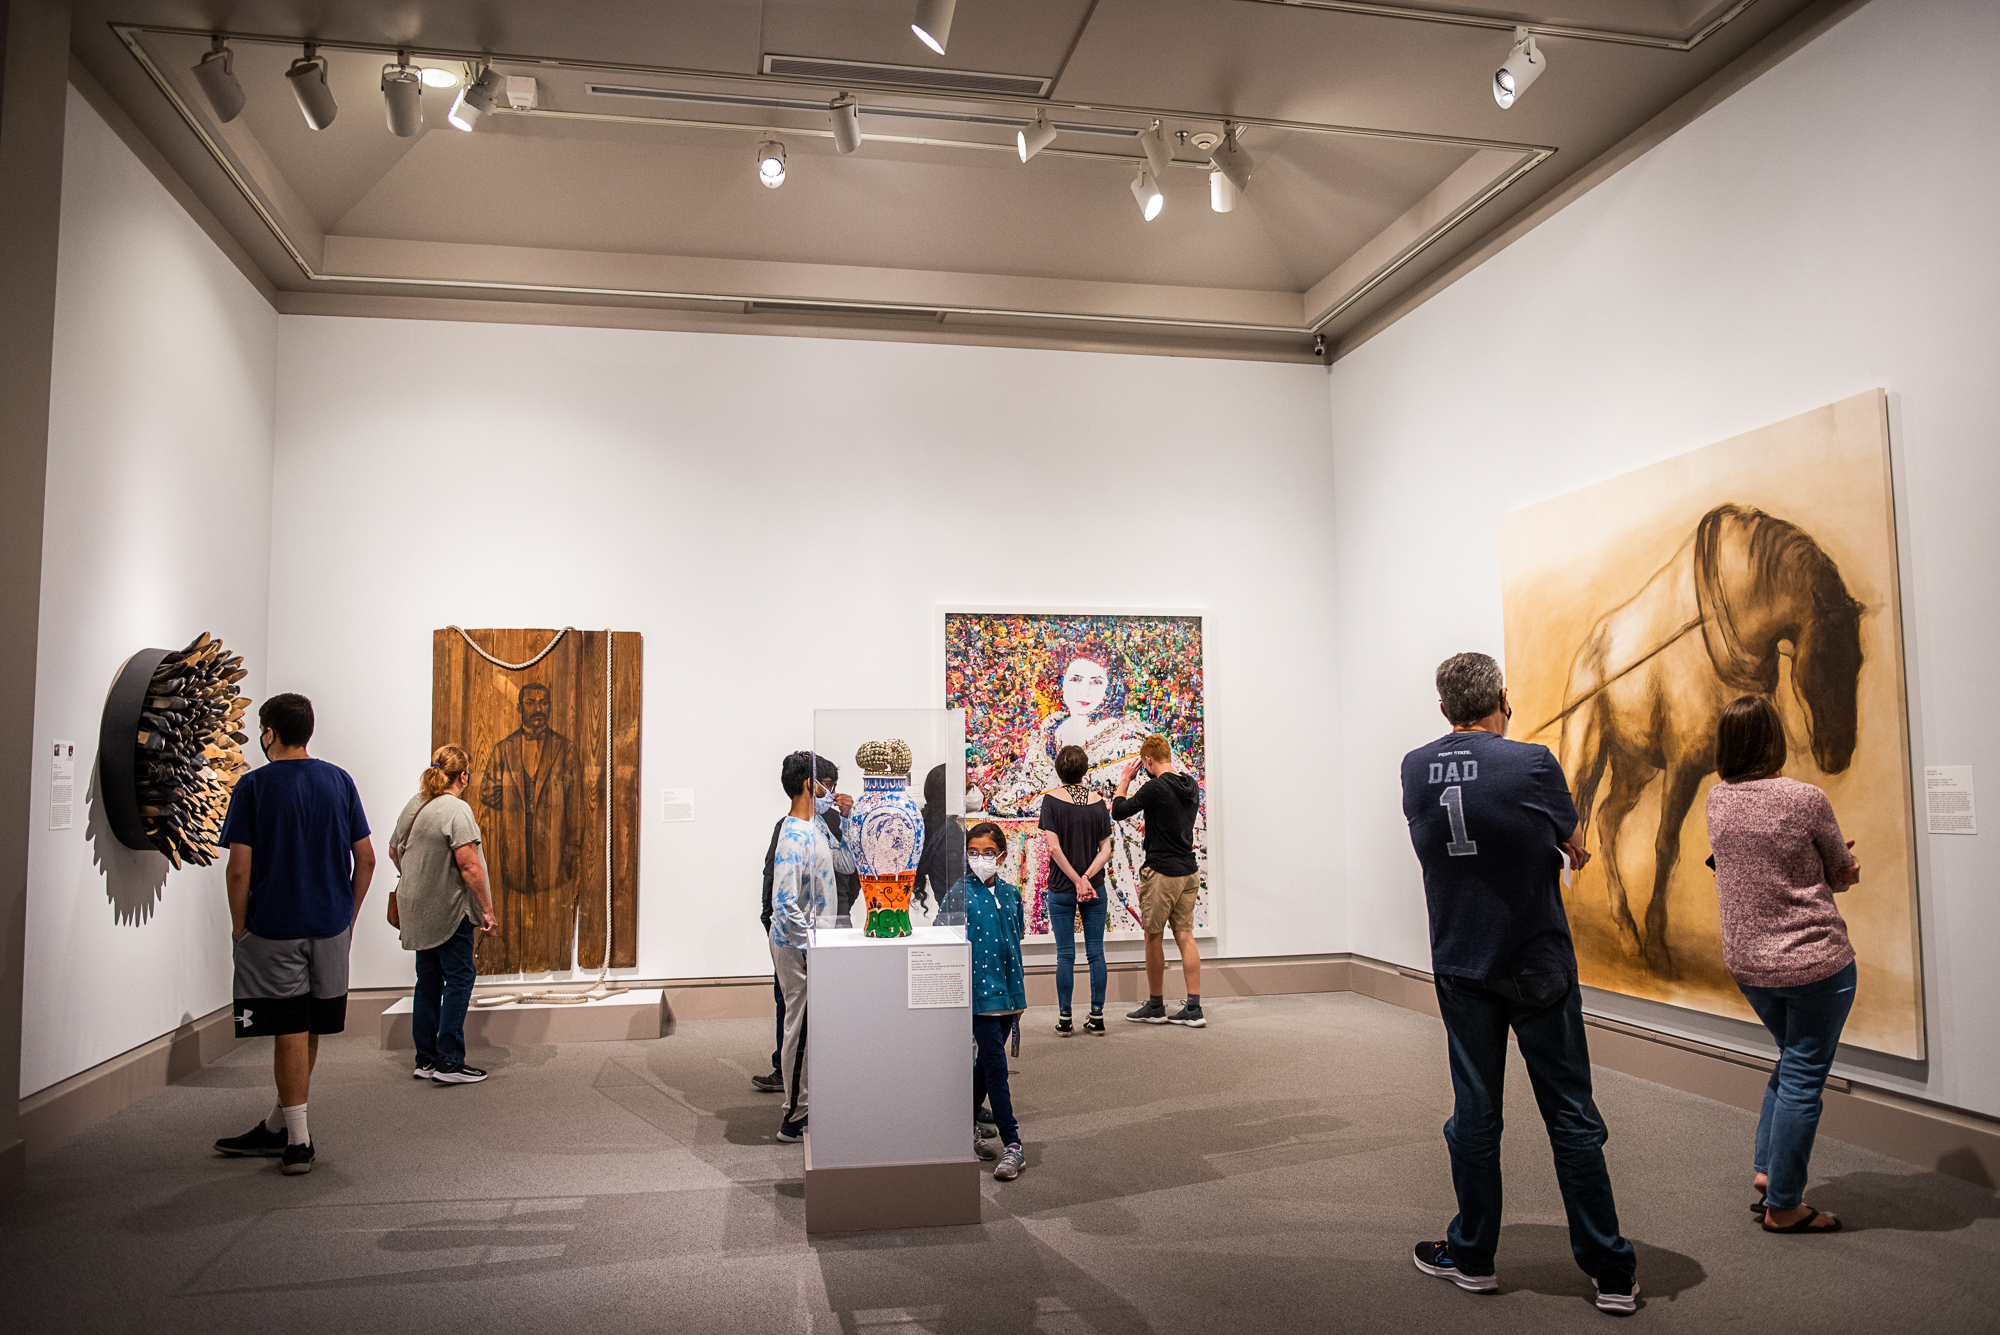 Visitors to the Pincus Gallery at the Palmer Museum of Art